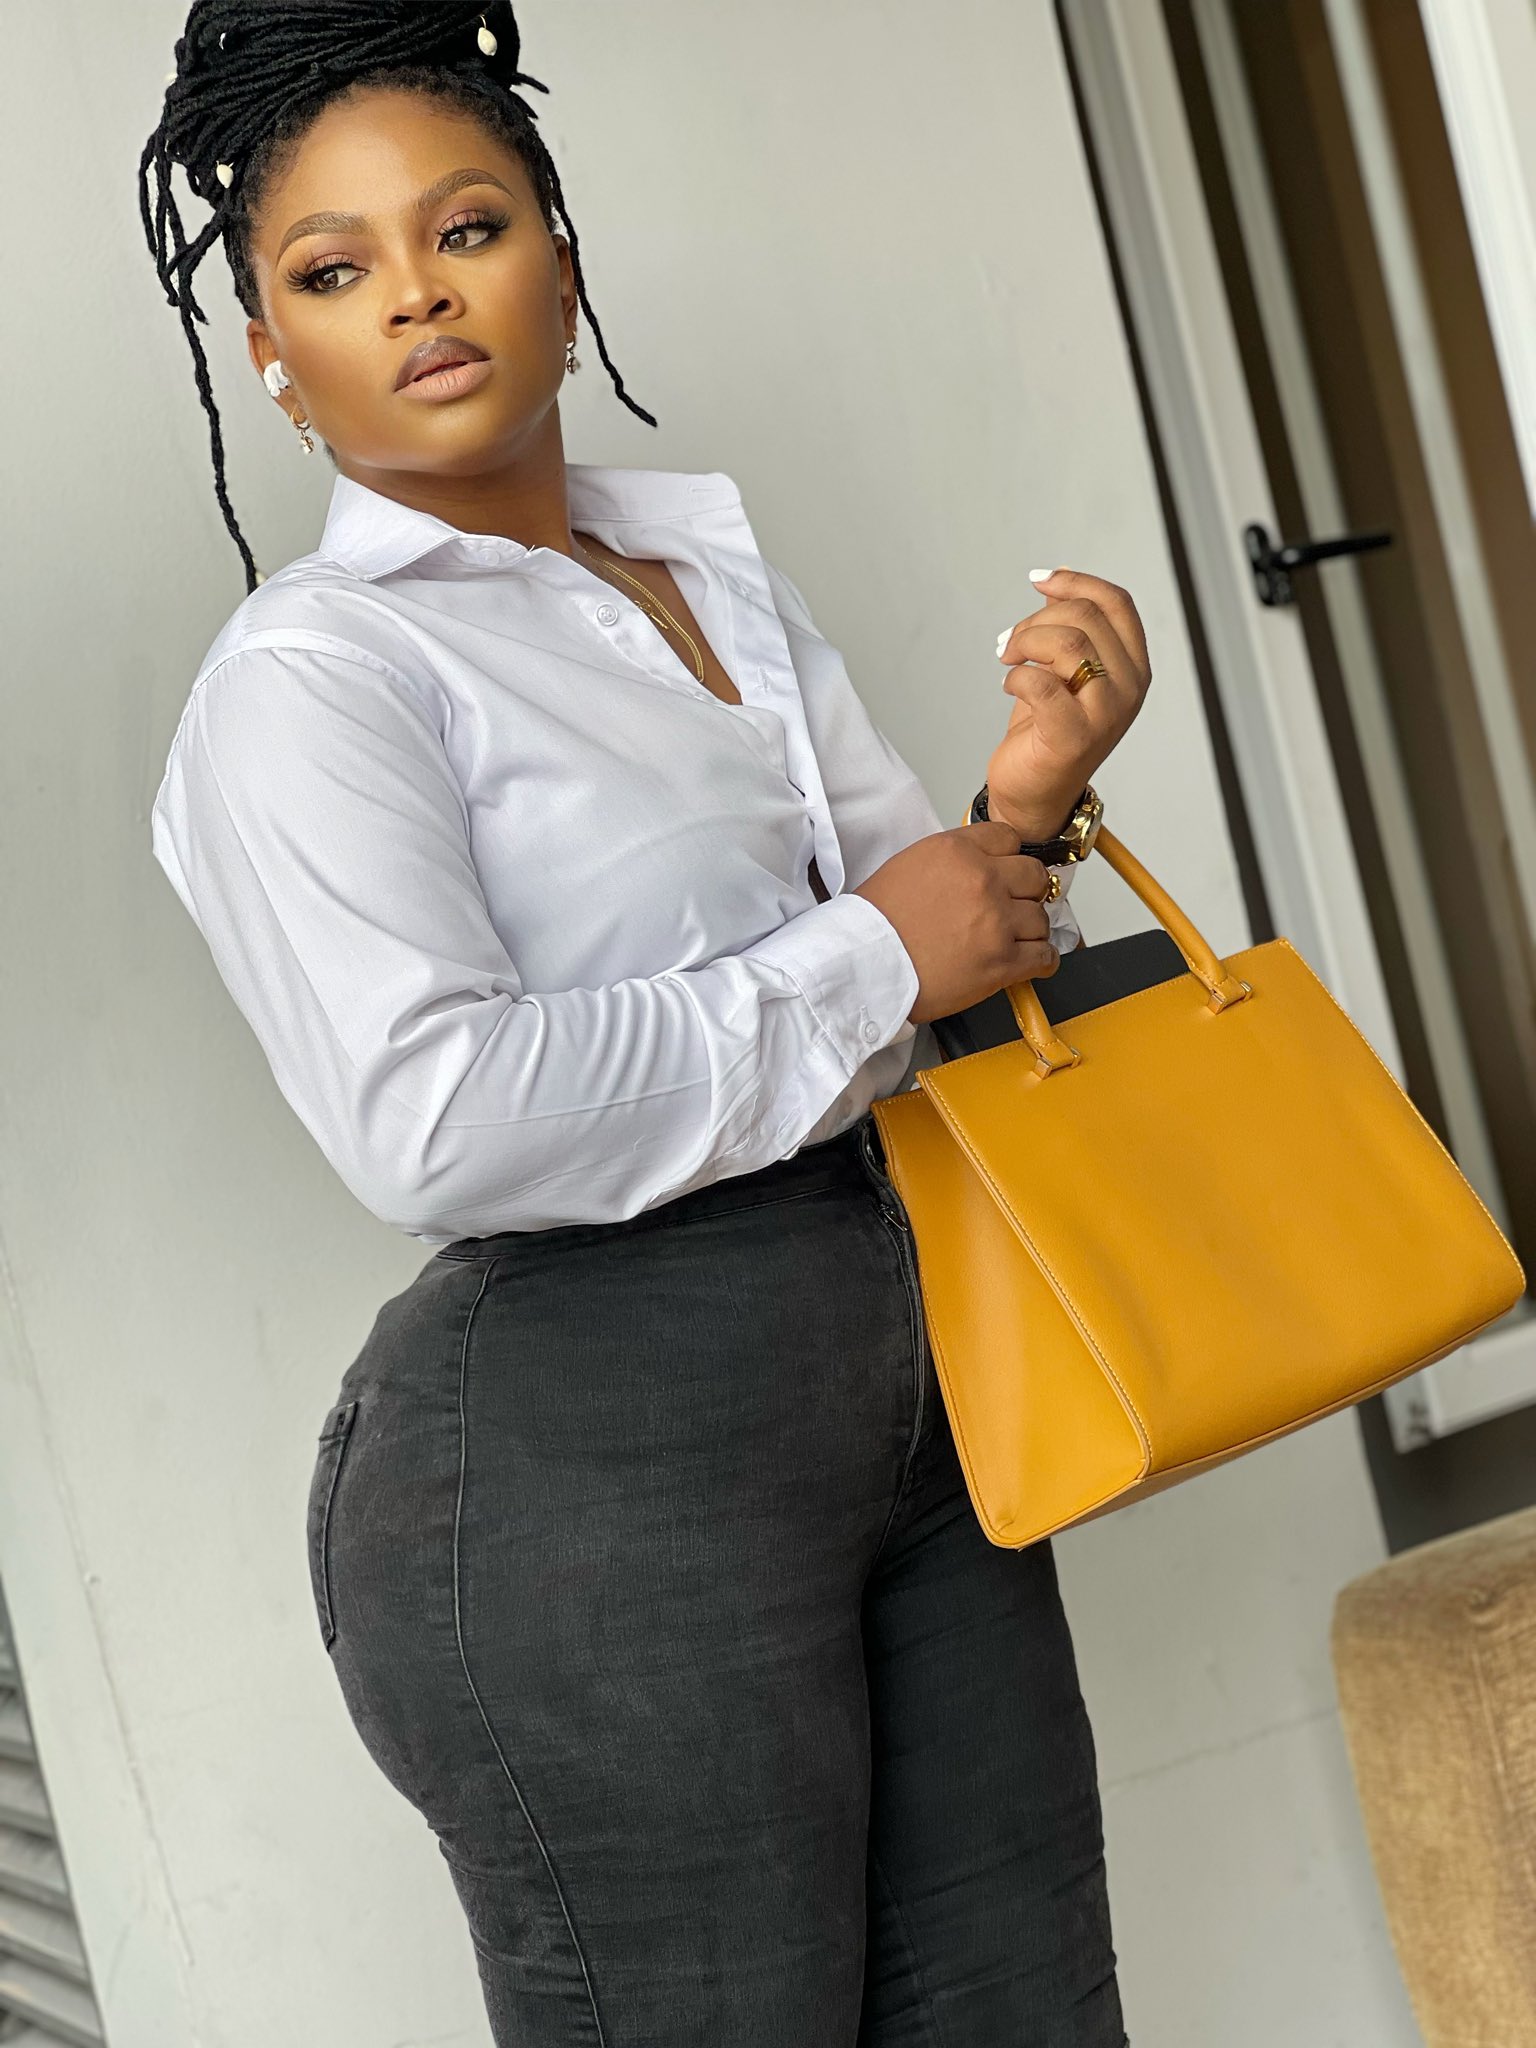 BBNaija star, Tega Dominic reacts after being called a retired as**wo